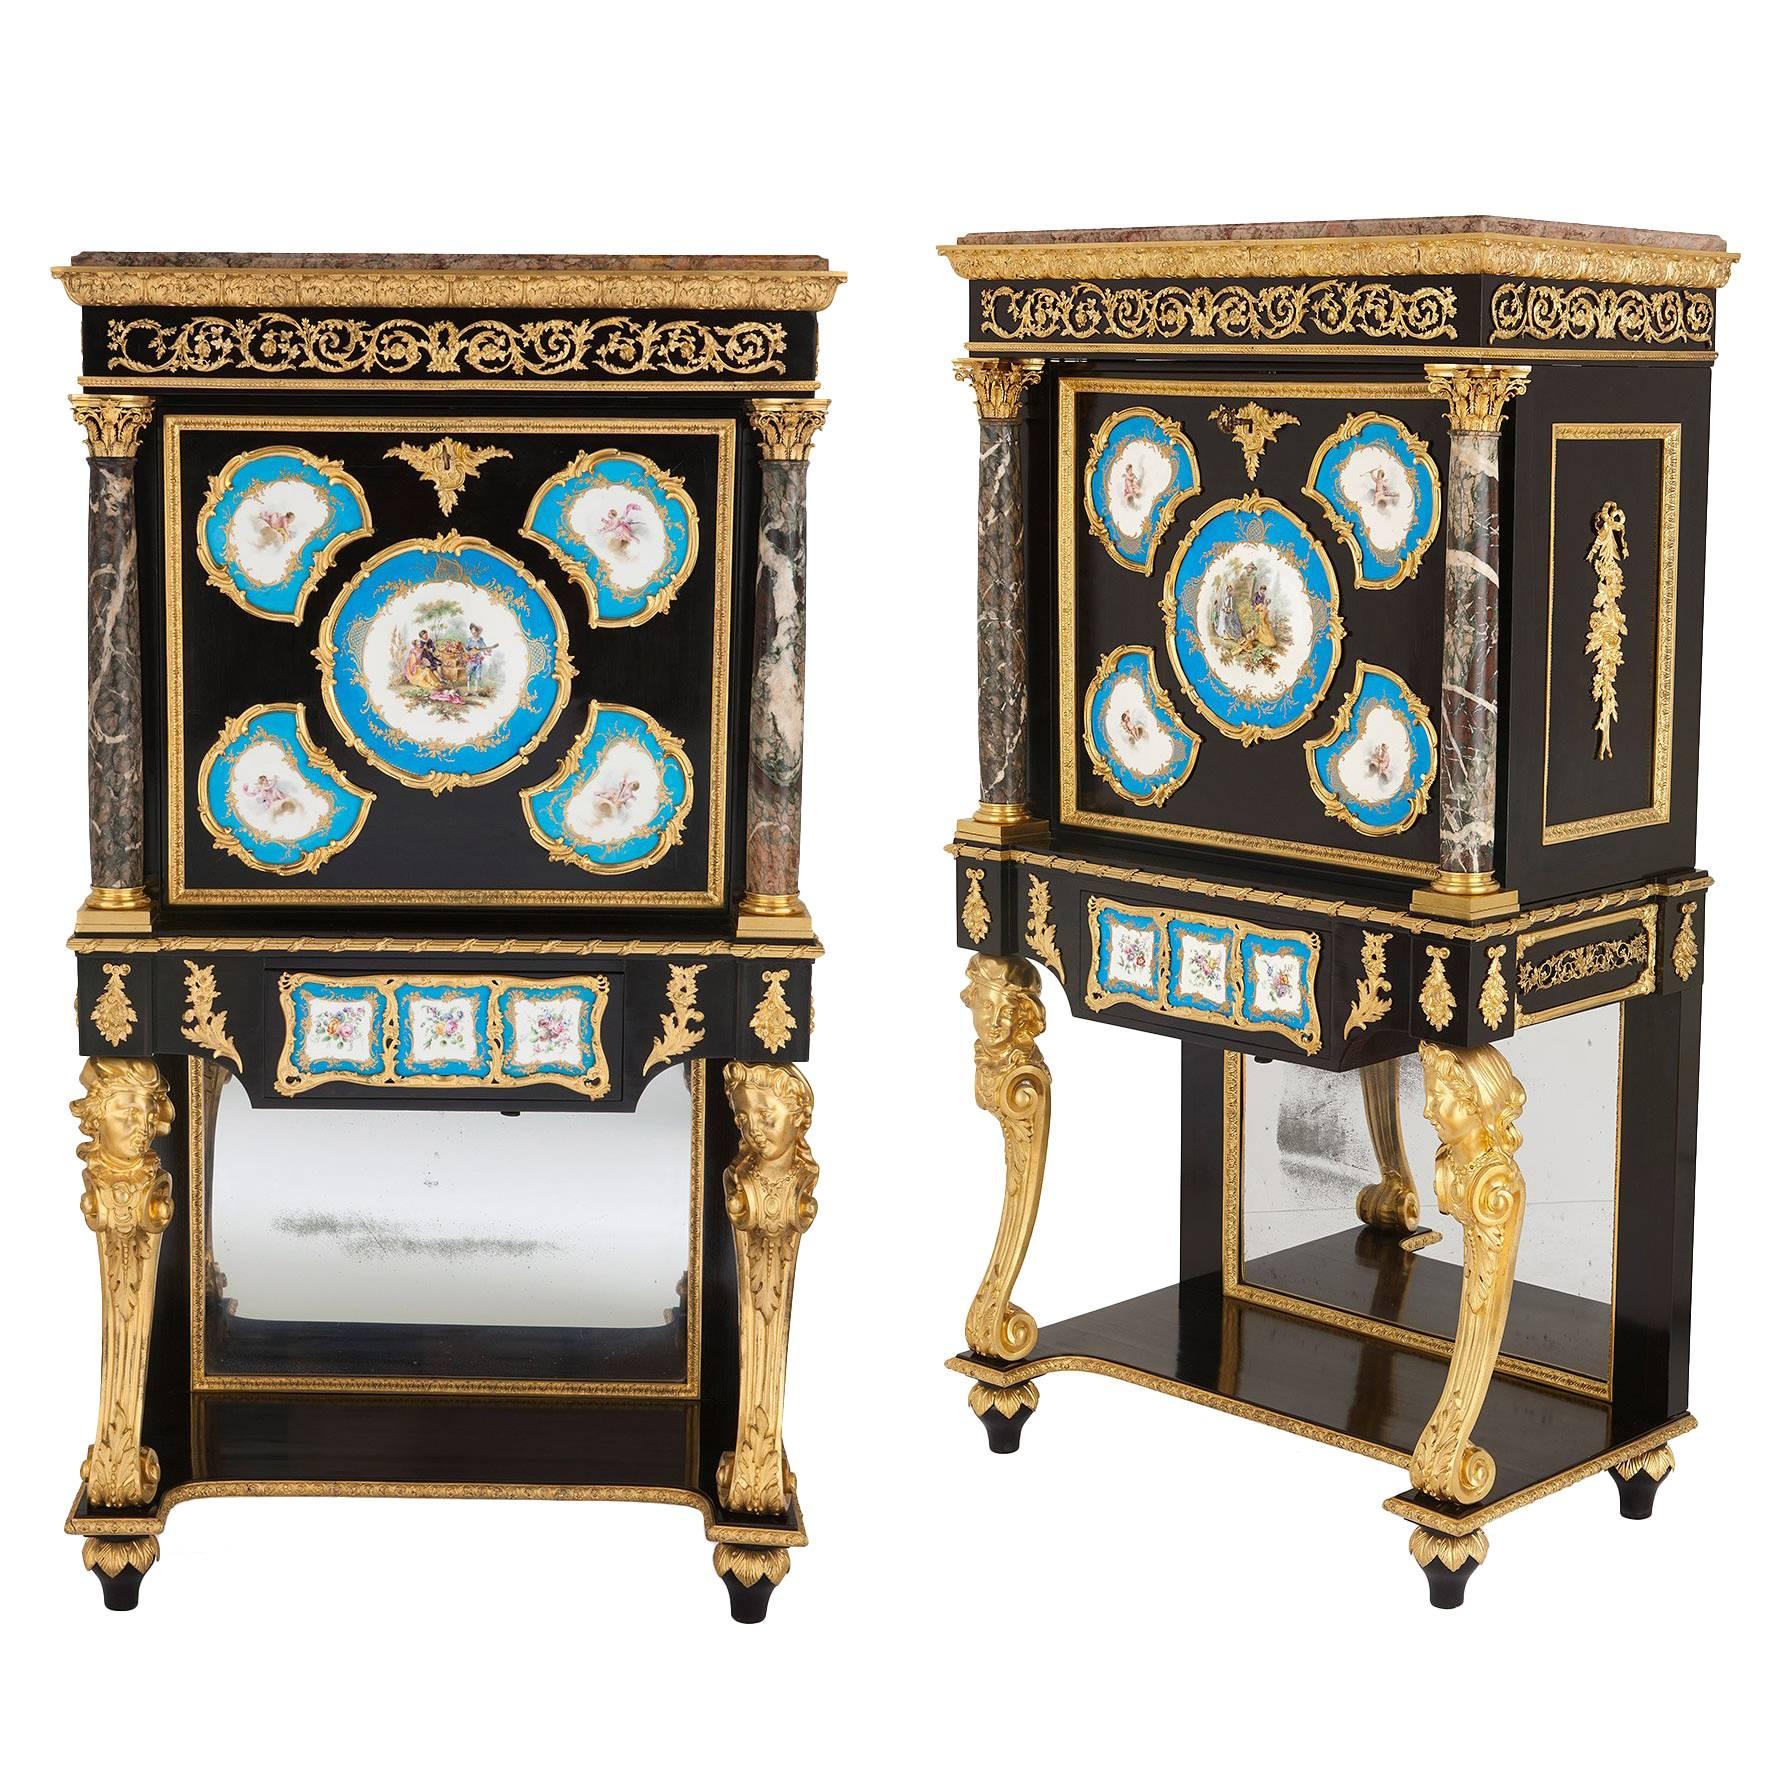 Pair of Victorian Ormolu, Marble and Porcelain Secretaires